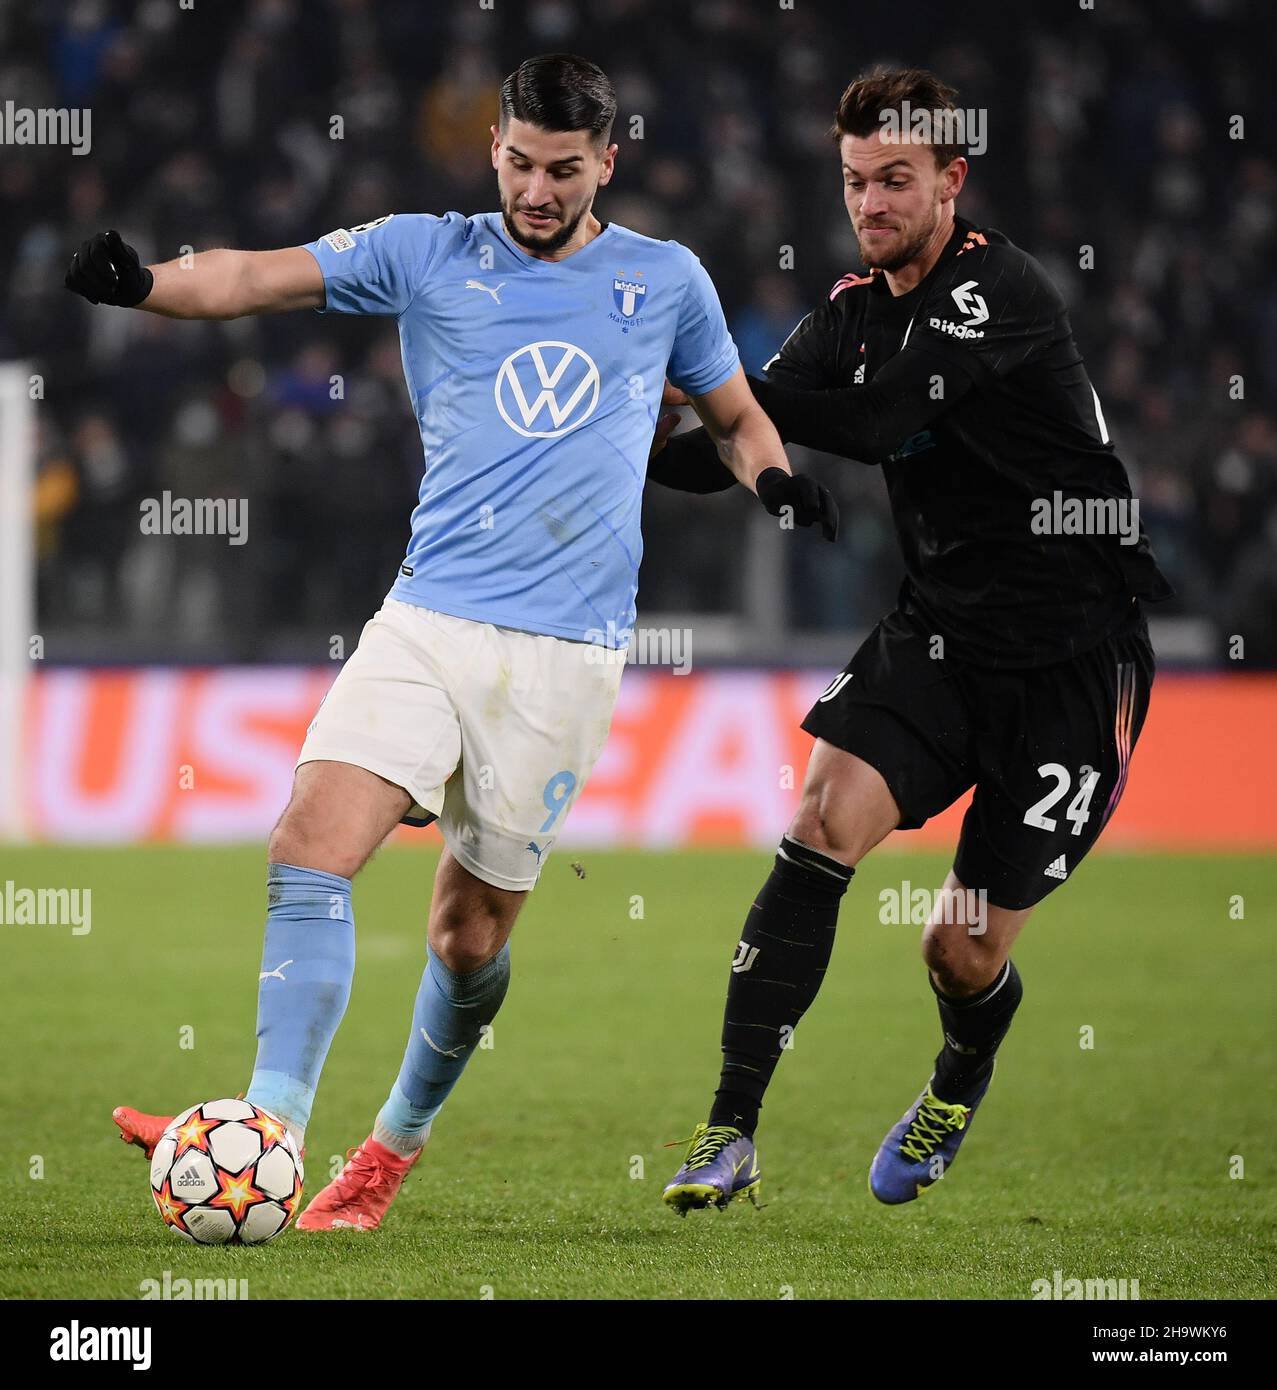 Turin, Italy. 8th Dec, 2021. FC Juventus' Daniele Rugani (R) vies with Malmo's Antonio Colak during the UEFA Champions League Group H match between FC Juventus and Malmo in Turin, Italy, Dec. 8, 2021. Credit: Federico Tardito/Xinhua/Alamy Live News Stock Photo